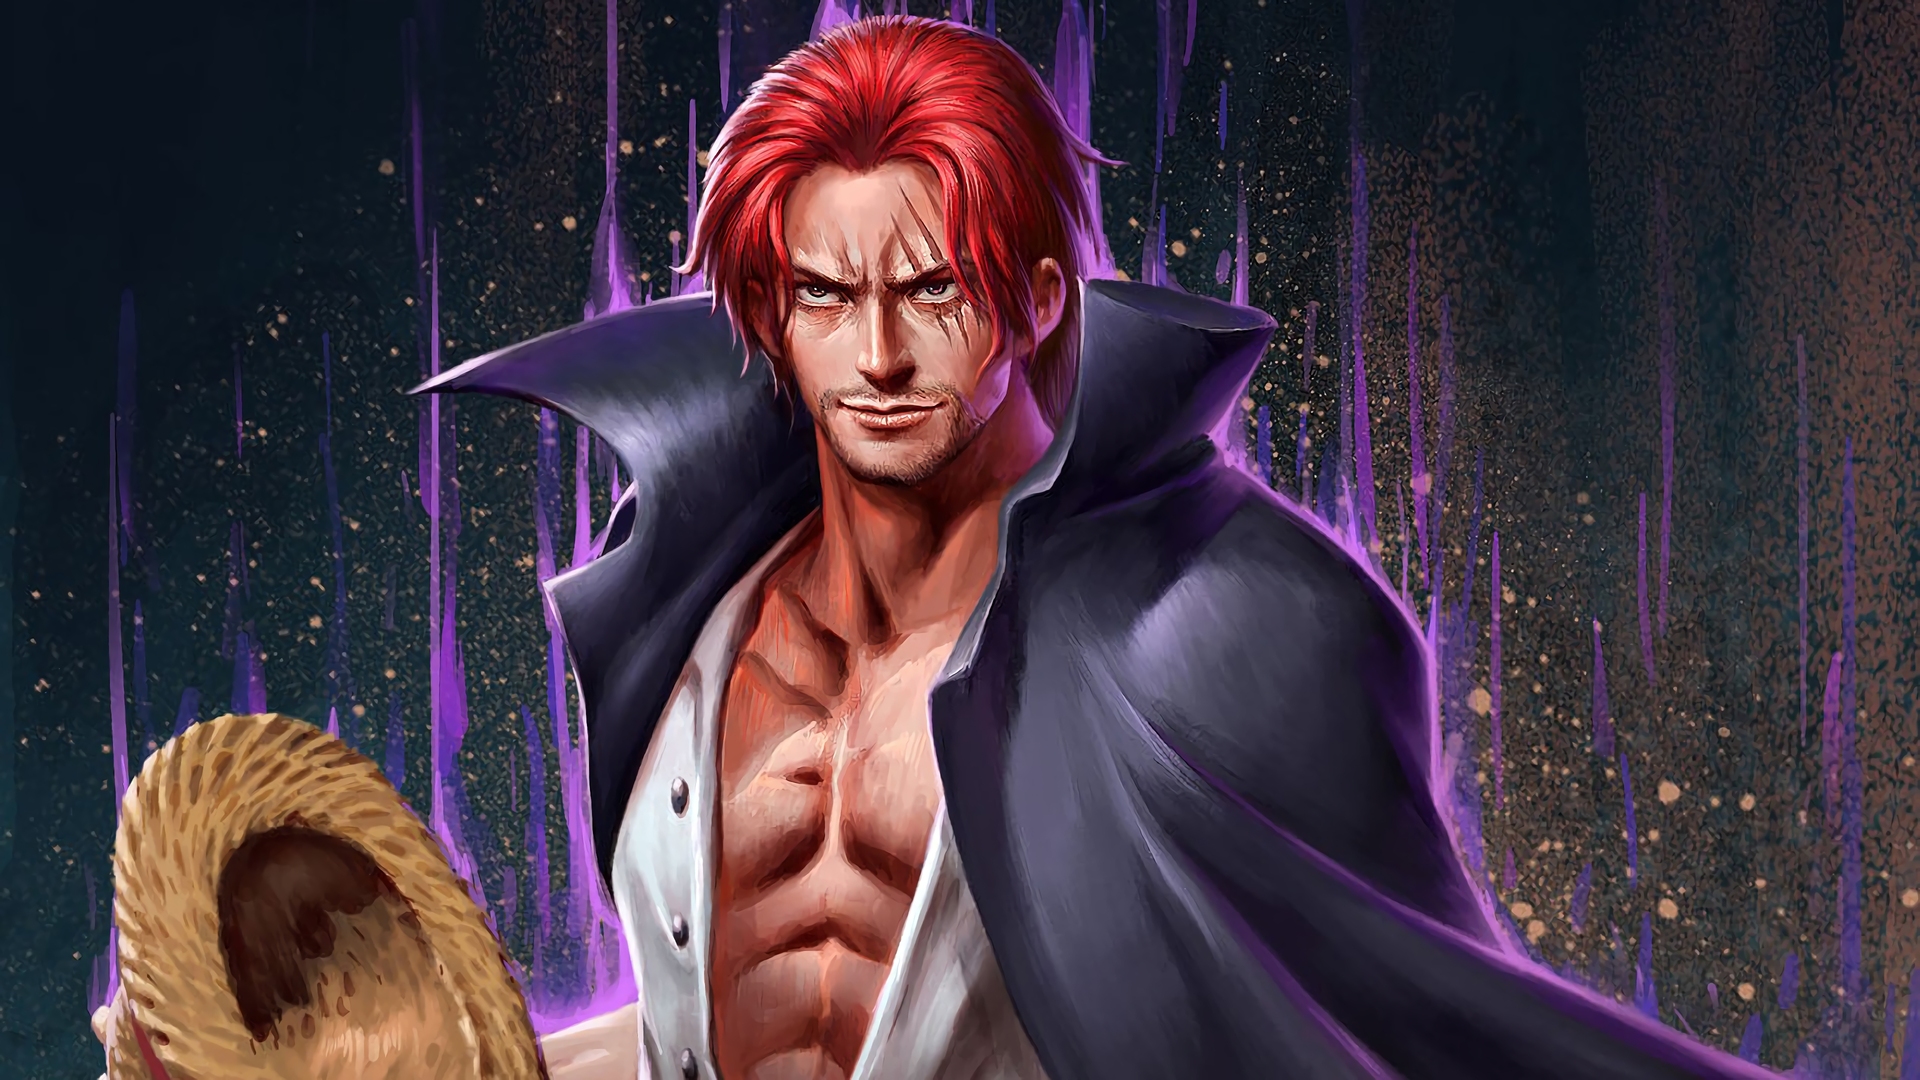 19x1080 Shanks One Piece Laptop Full Hd 1080p Hd 4k Wallpapers Images Backgrounds Photos And Pictures